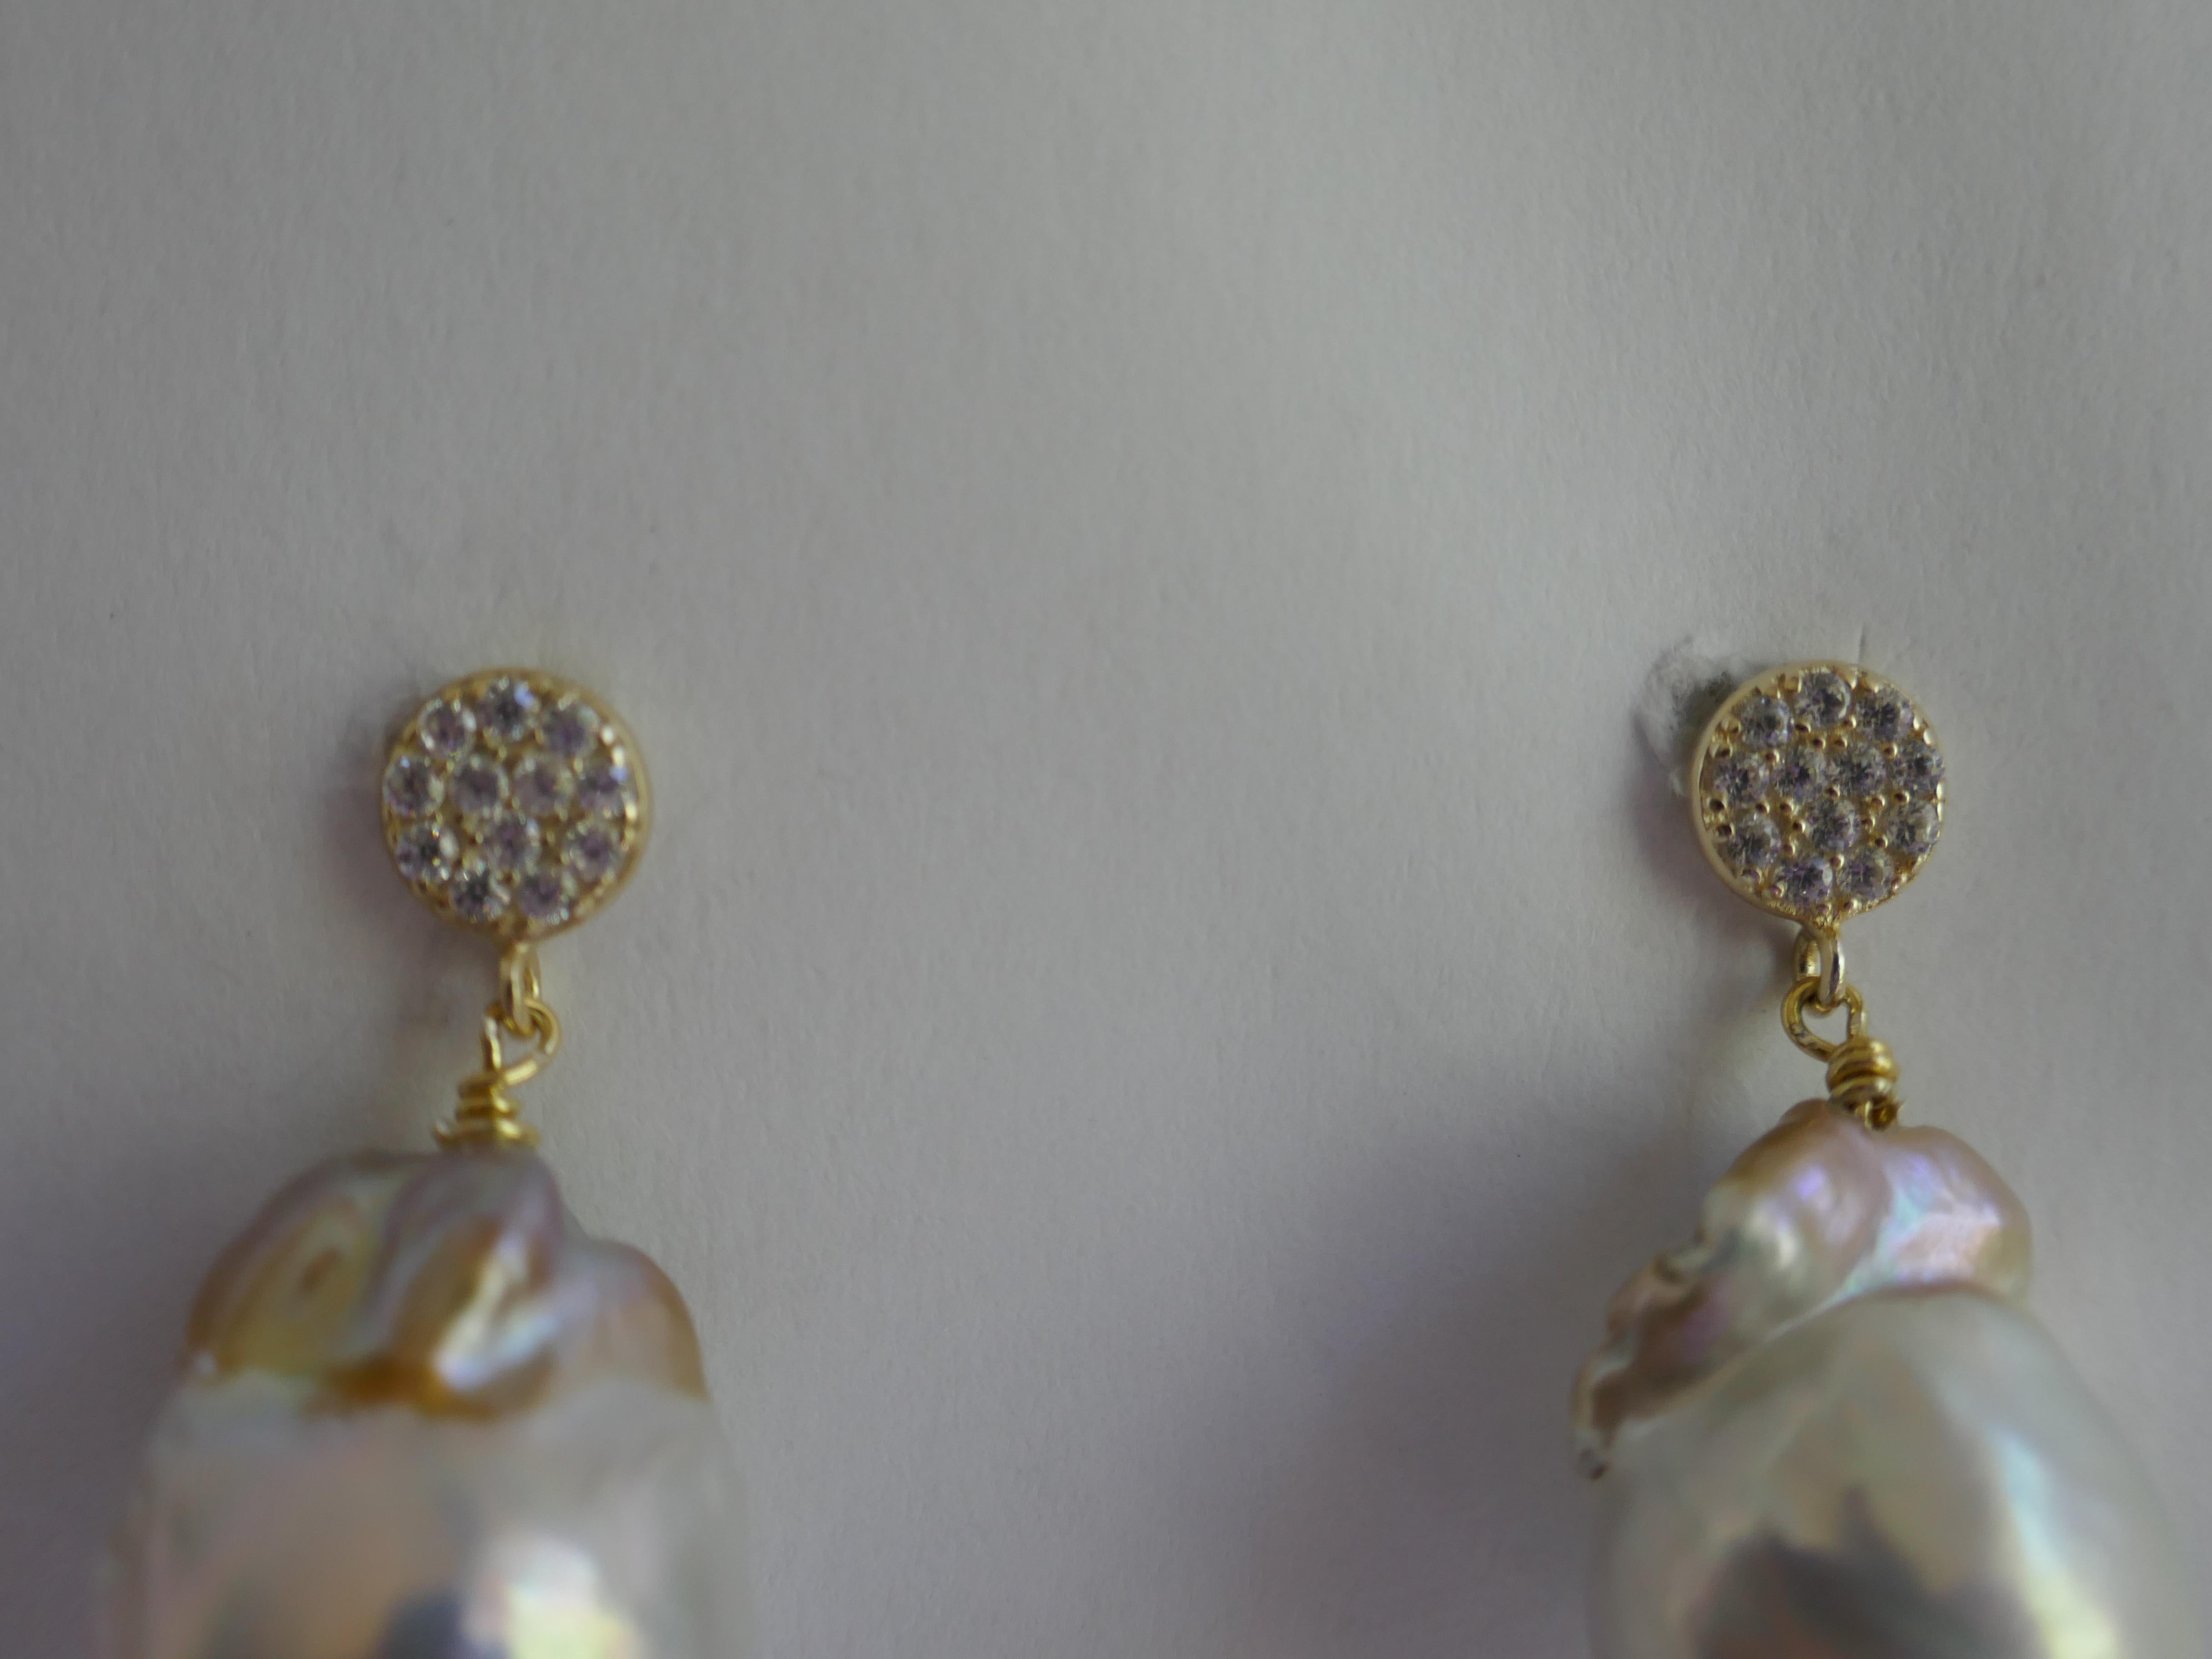 The earrings are white baroque cultured pearls with a little gold tone as seen in the picture. The size of the pearls is approximately  14mm  x 18mm  The post are vermeil cubic zirconia 7mm with push backs screw backs. The earrings are 1 3/8  inches